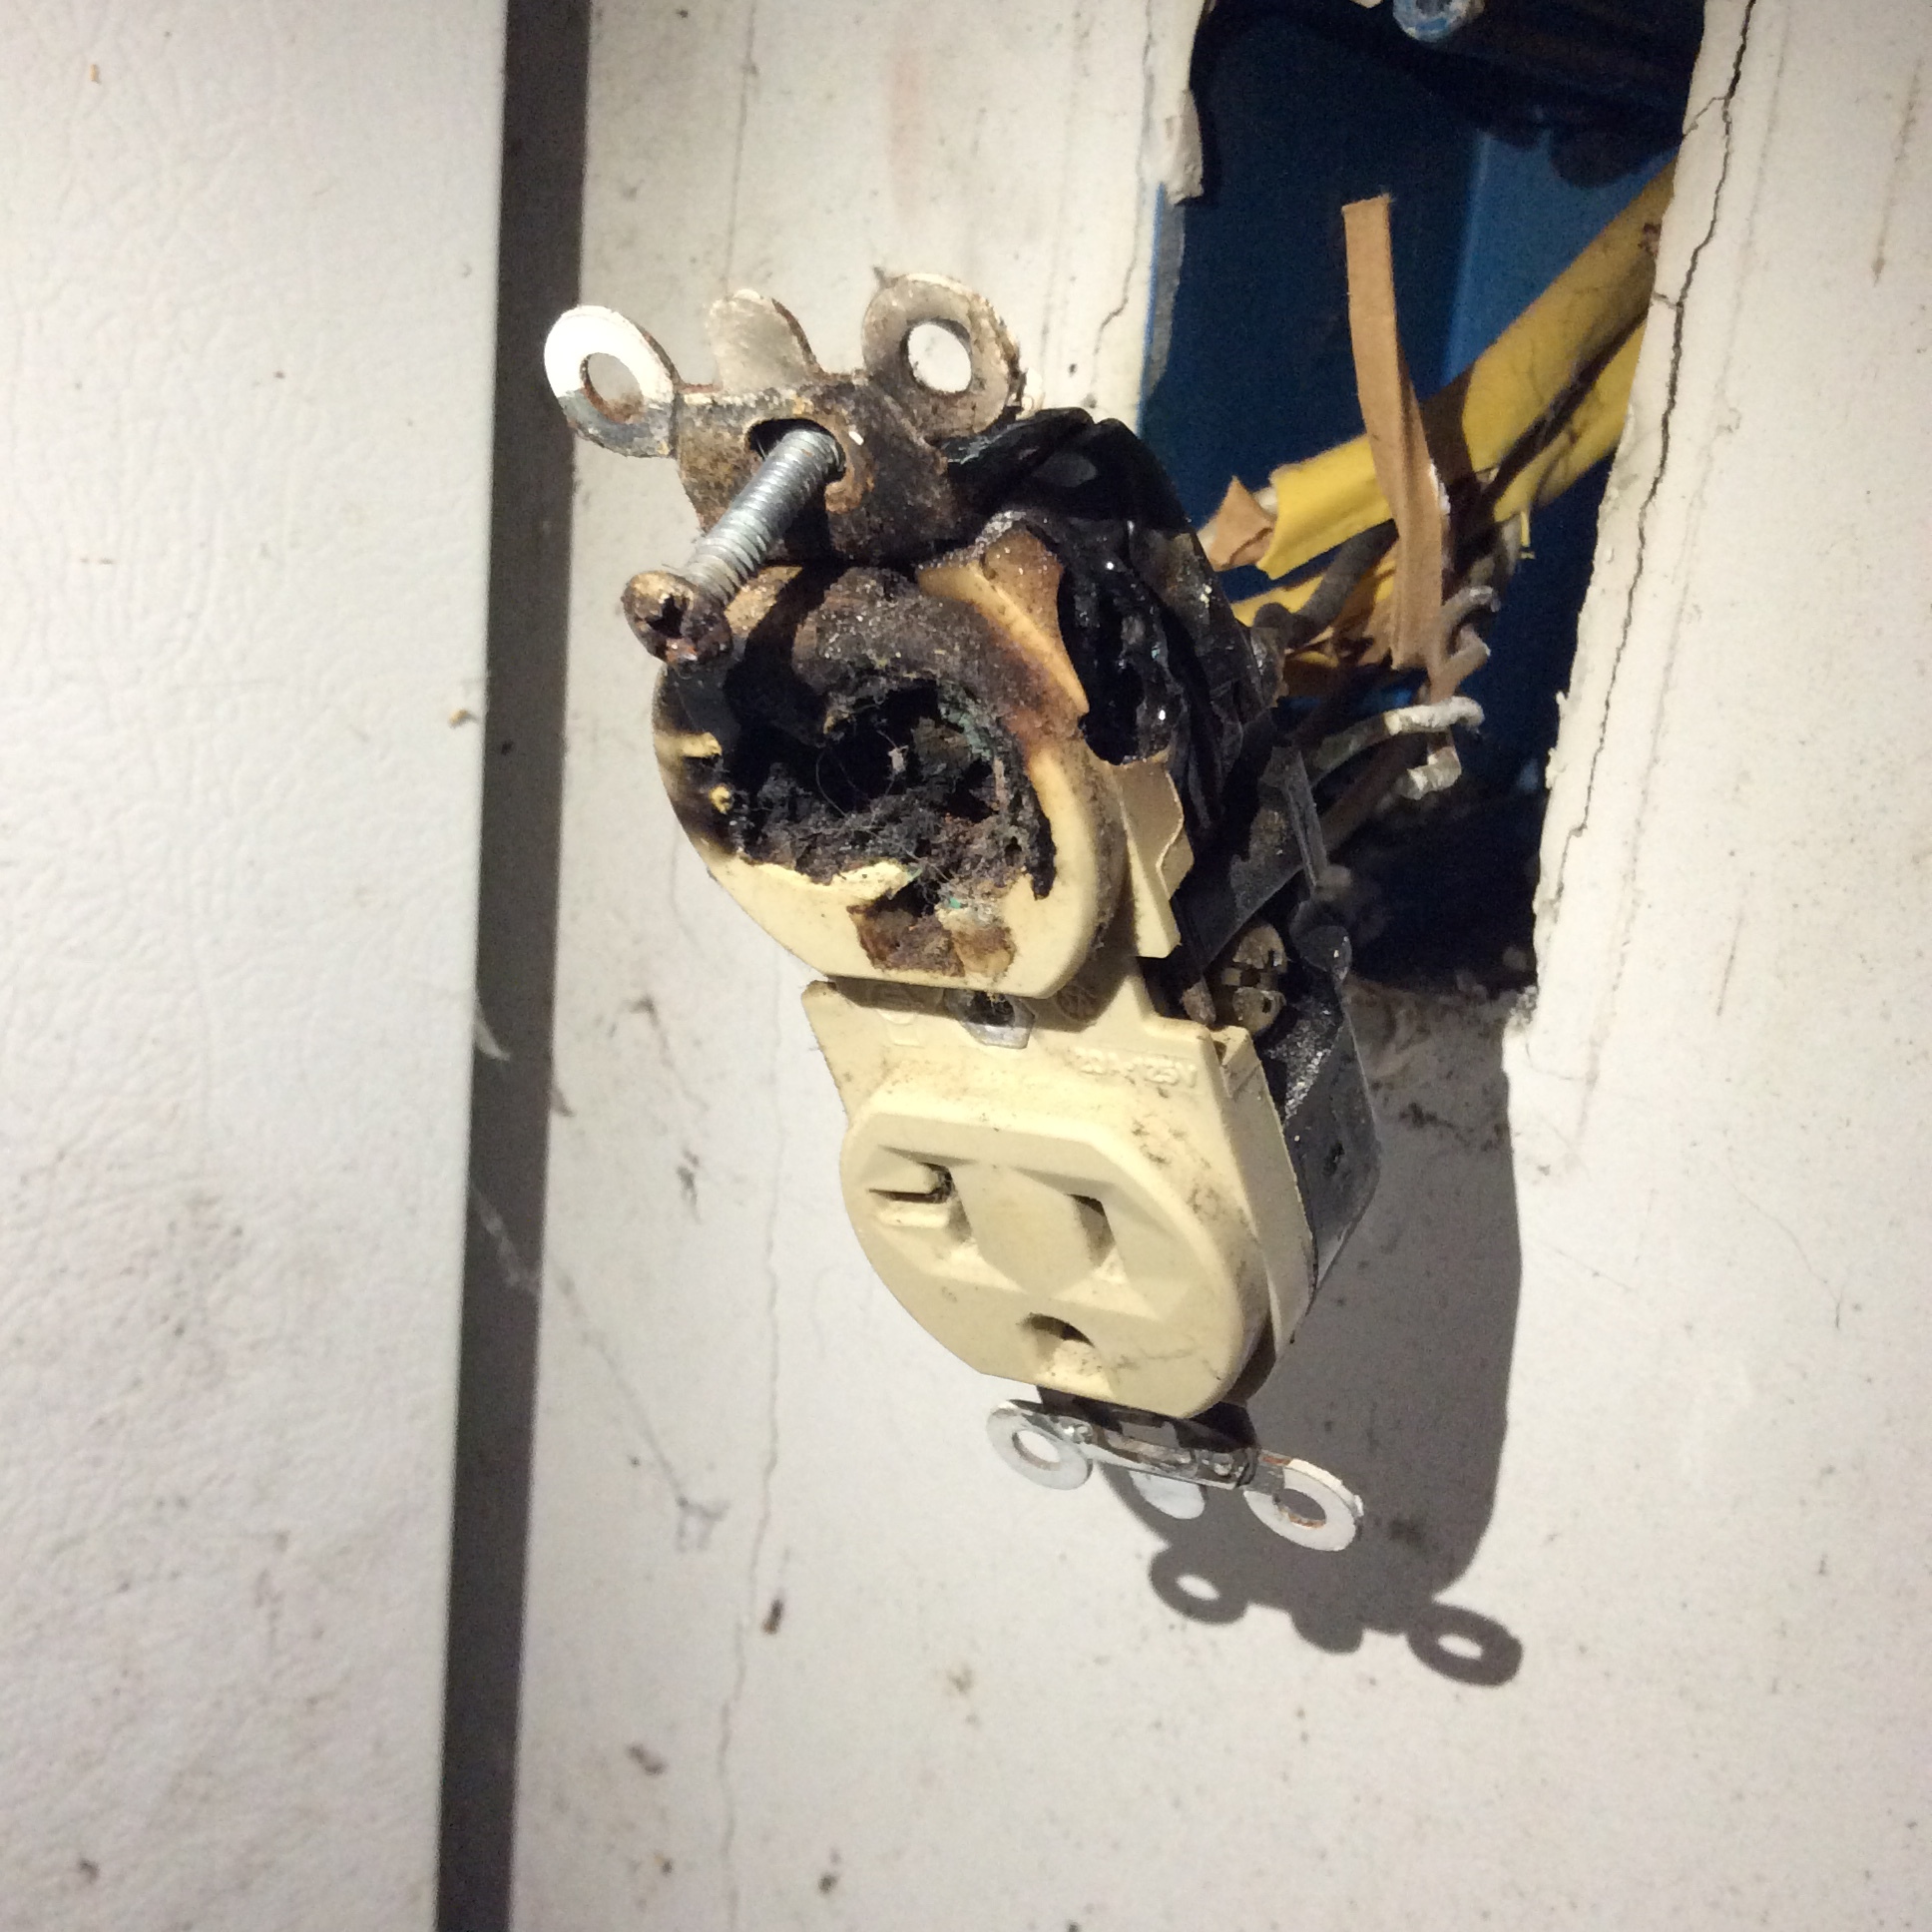 Another burned receptacle